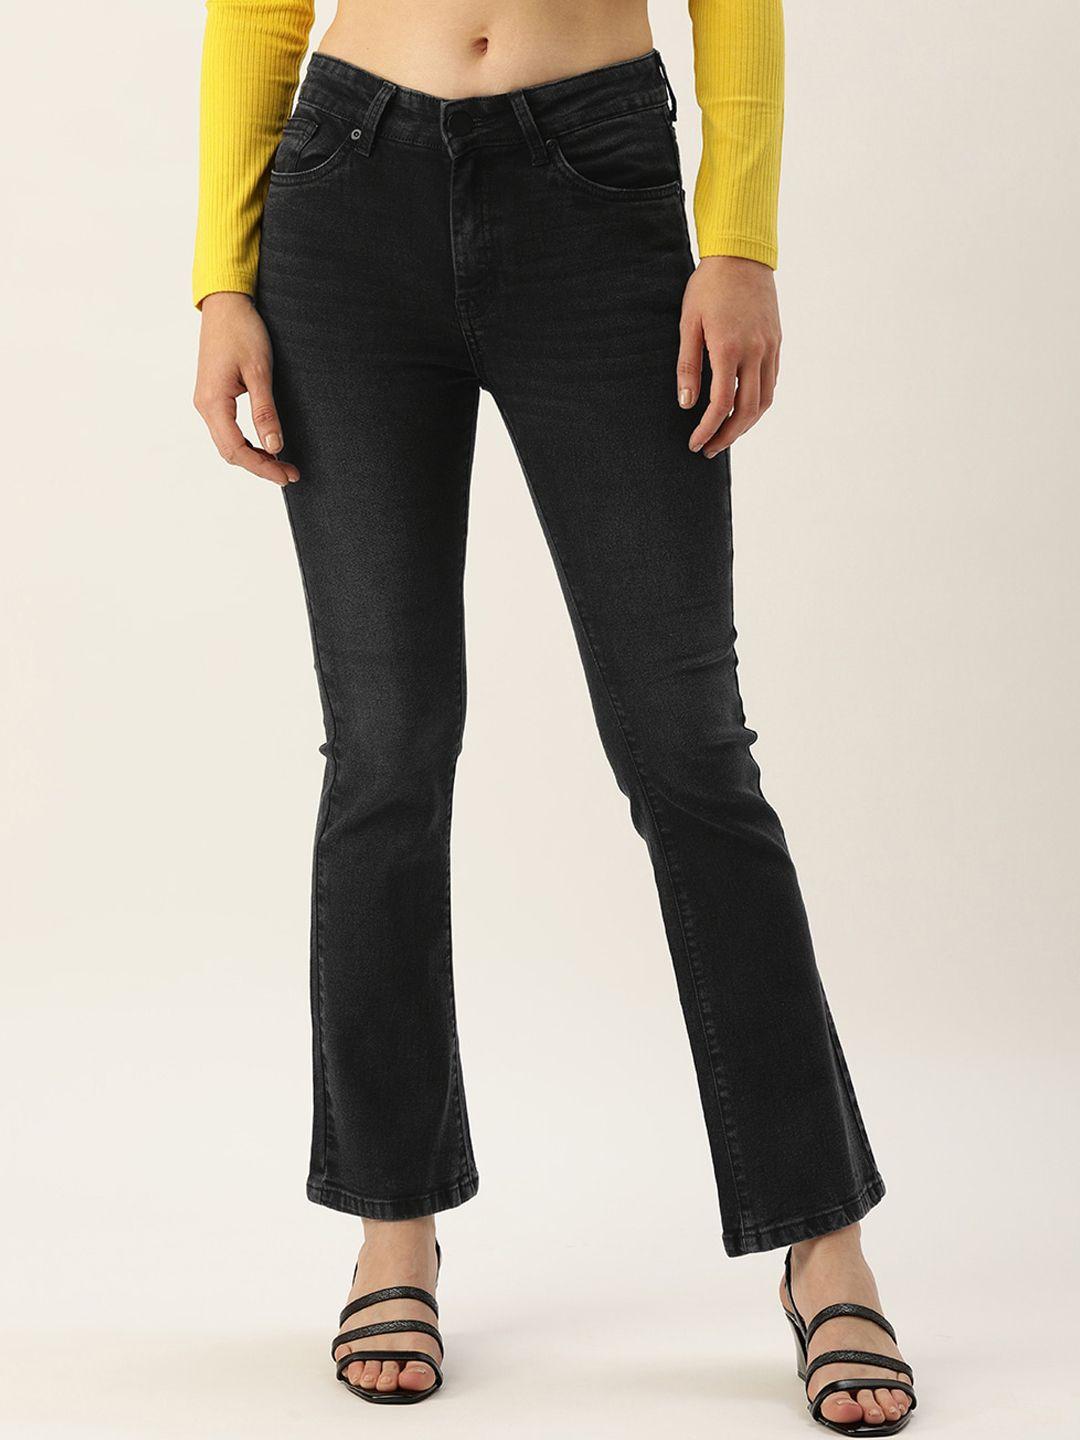 ivoc-women-clean-look-bootcut-stretchable-jeans